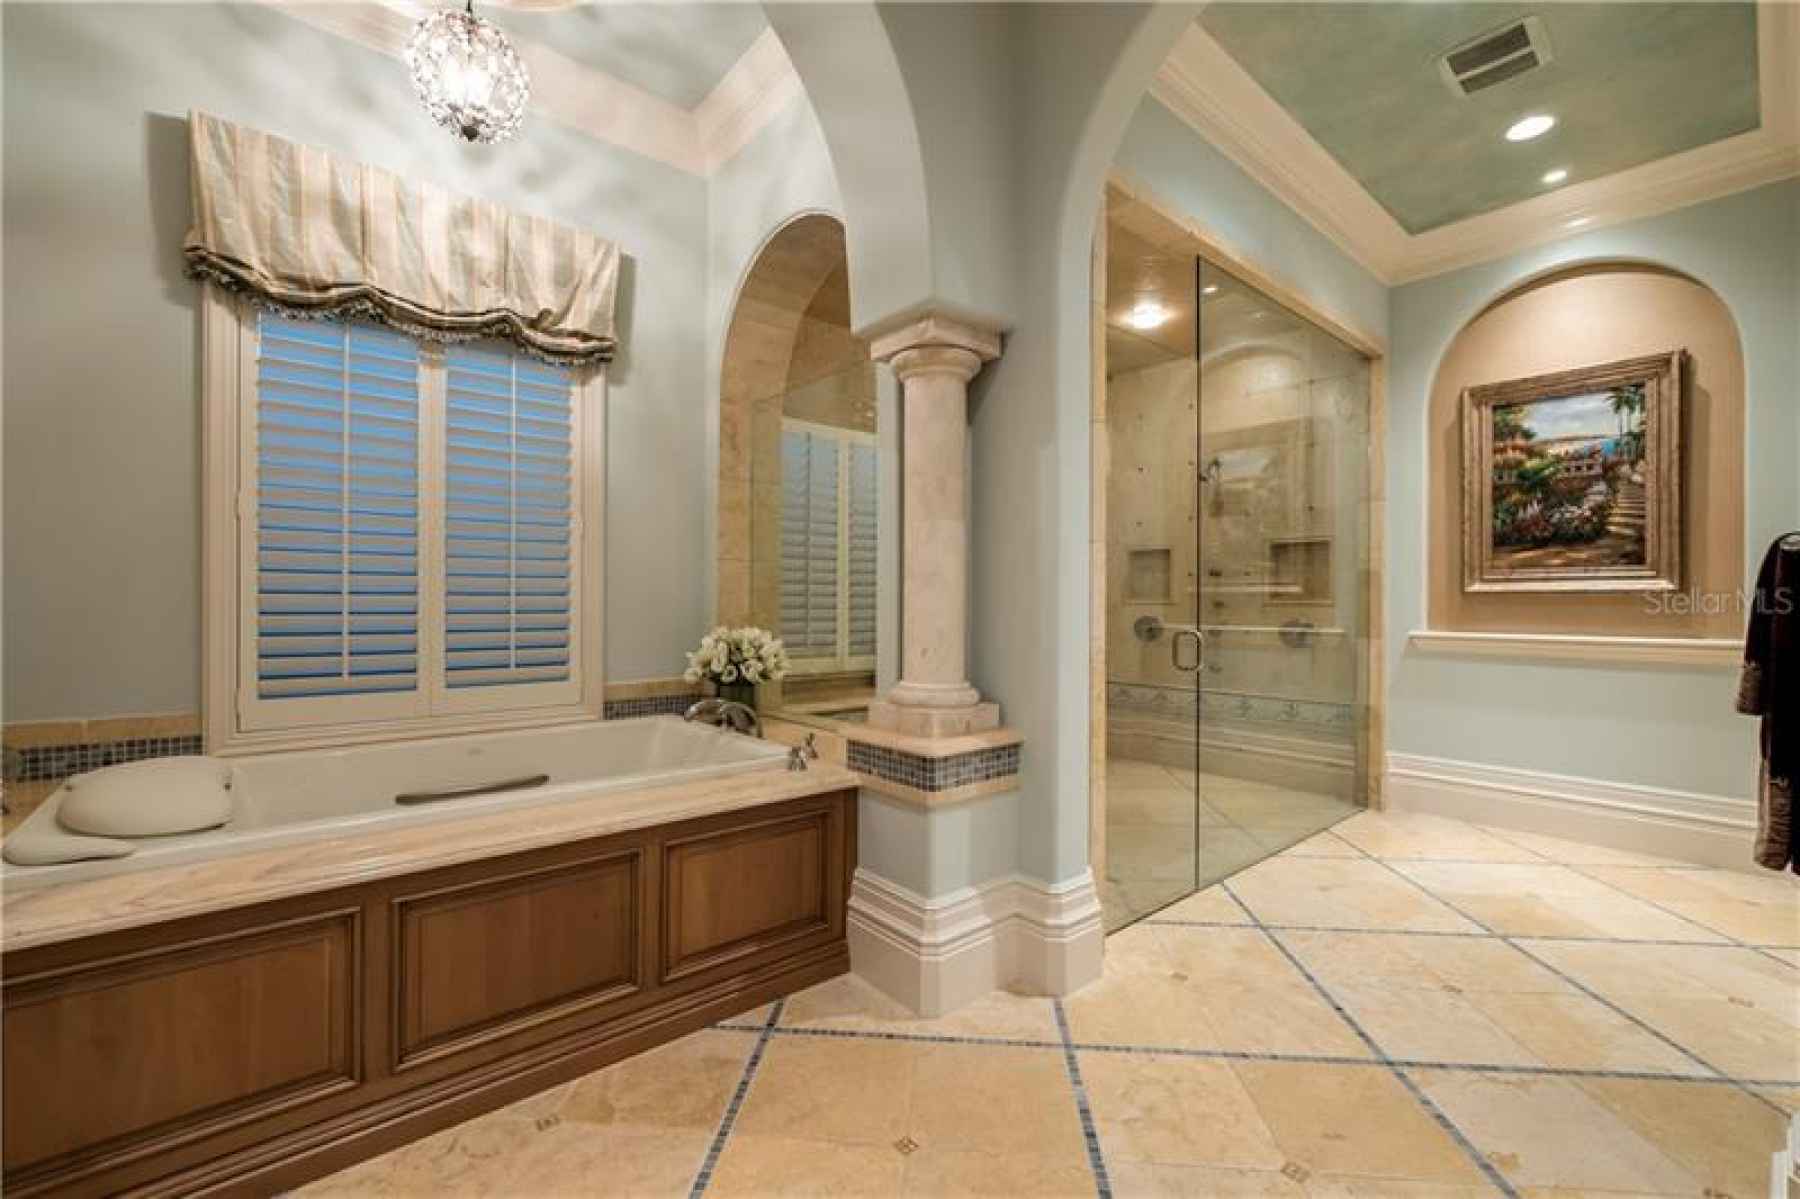 Soaking Tub and Walk-In Shower for Ultimate Relaxation